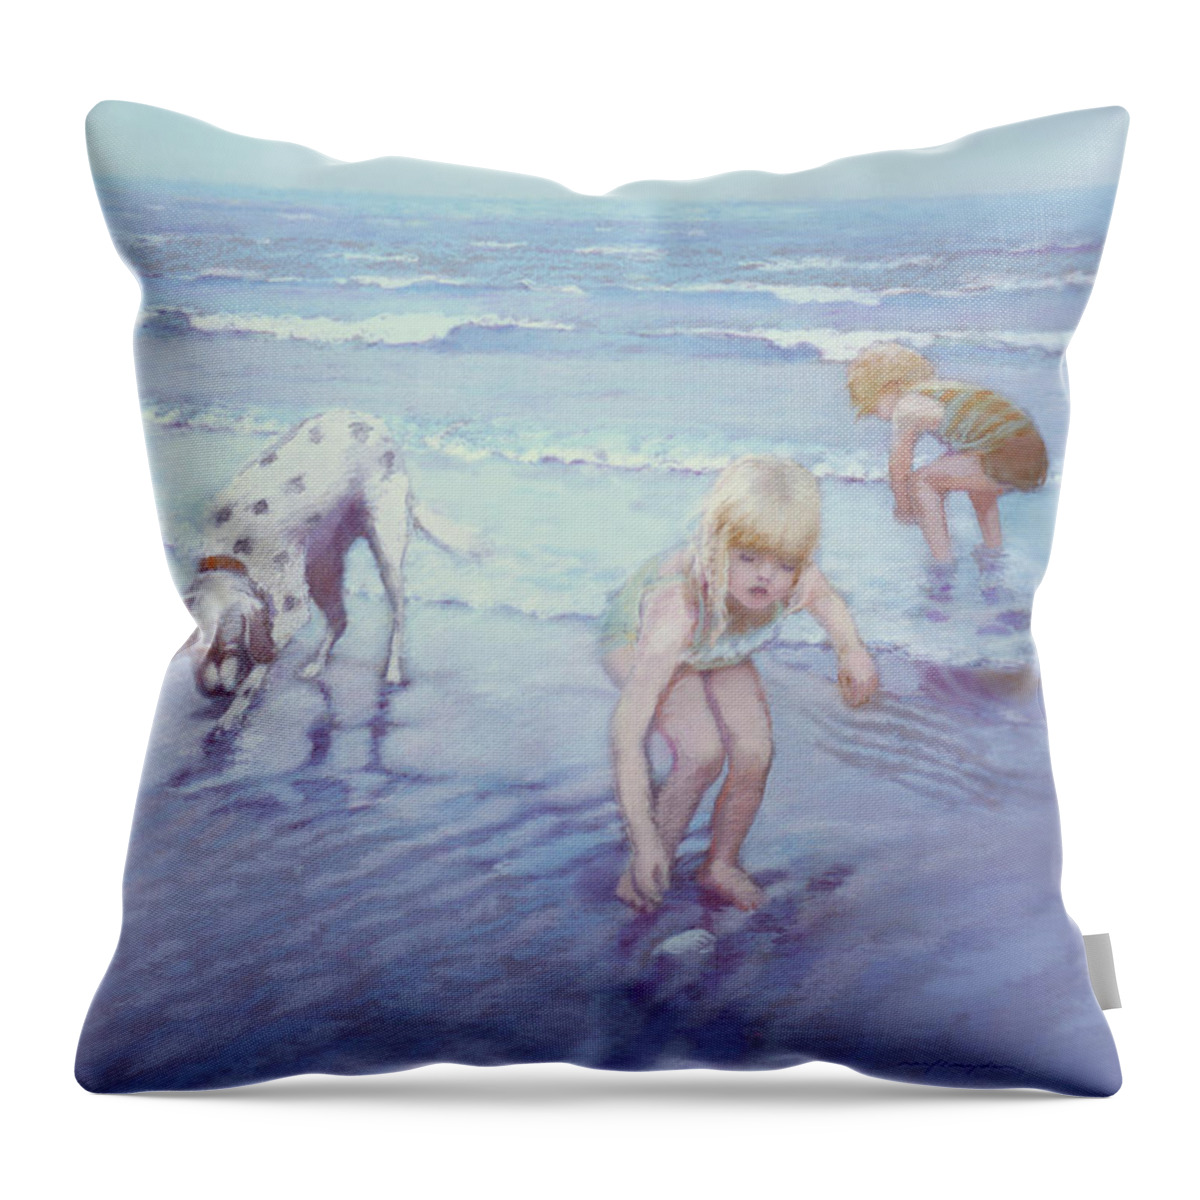 Beach Throw Pillow featuring the painting Beach Threesome by J Reifsnyder